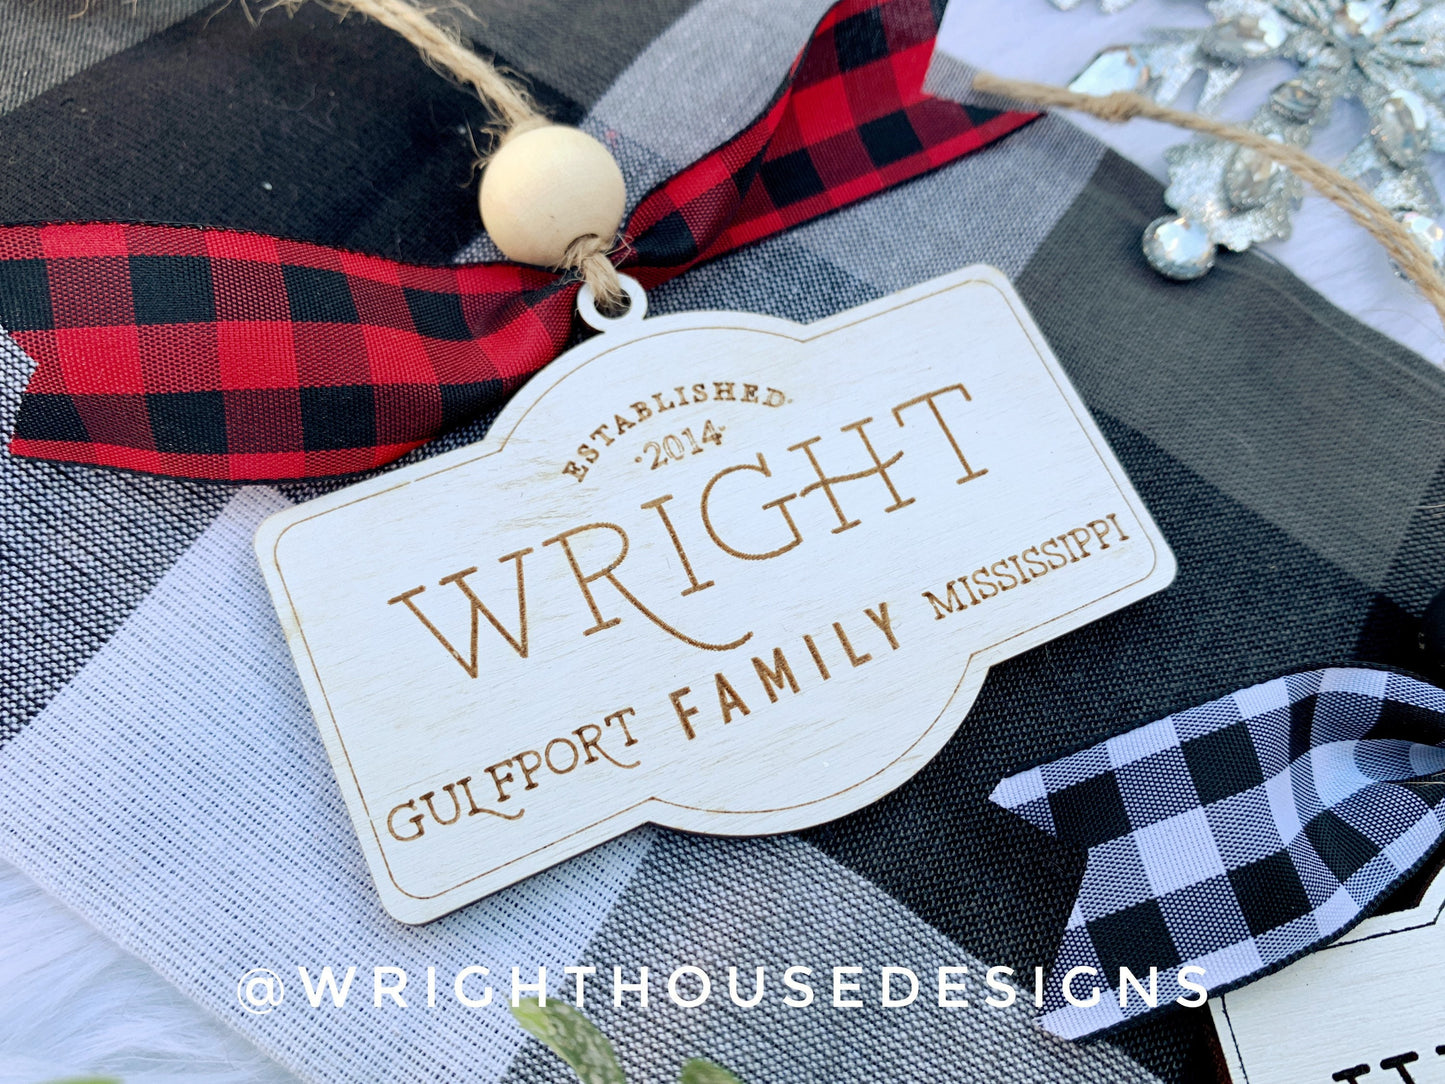 Family Name Established Ornaments - Personalized Home Ornament - Wooden Christmas Tree Ornament - Yearly Keepsake Ornament - City and State